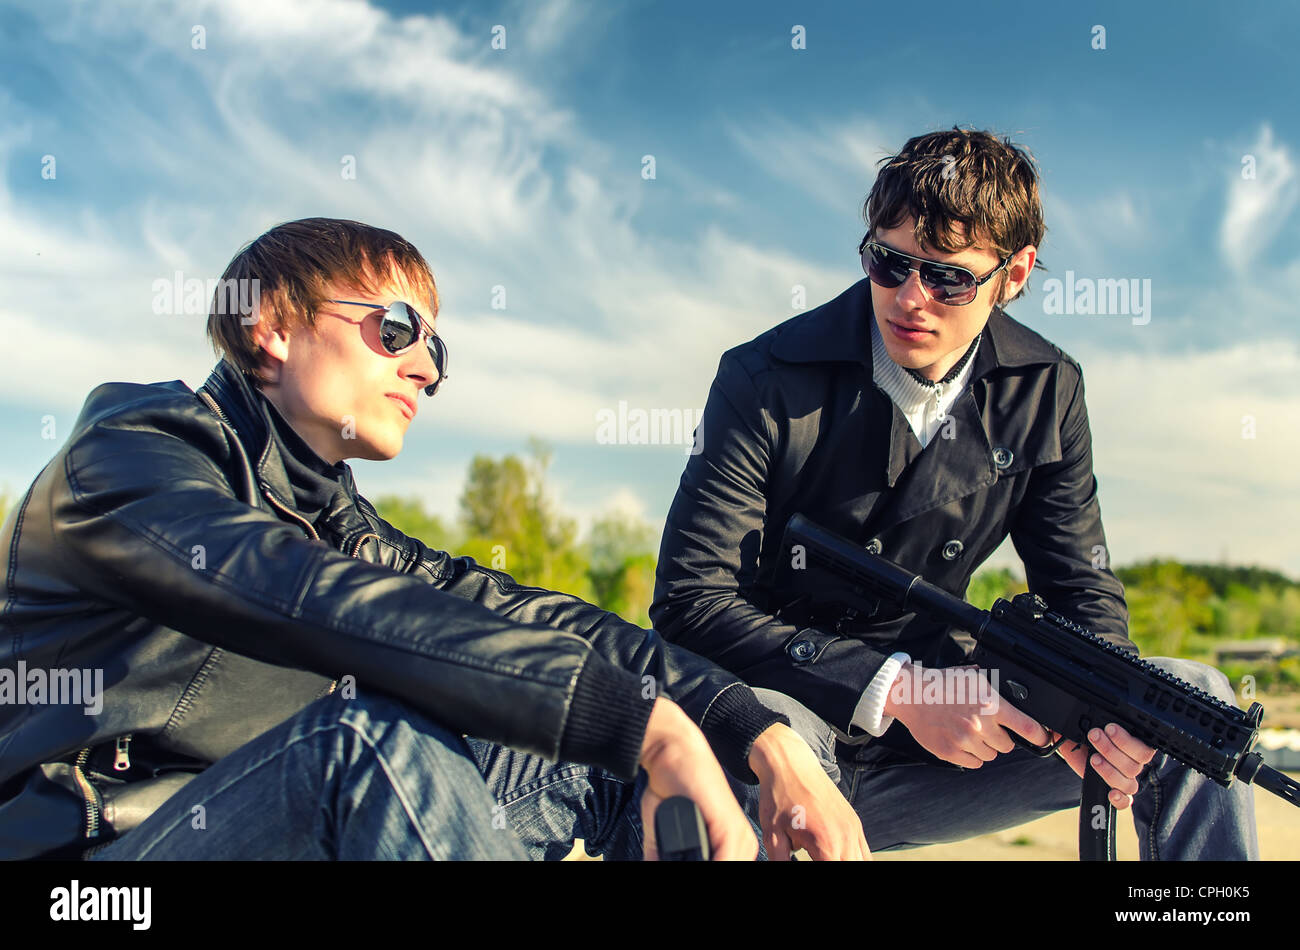 Portrait of two tough guys with guns Stock Photo